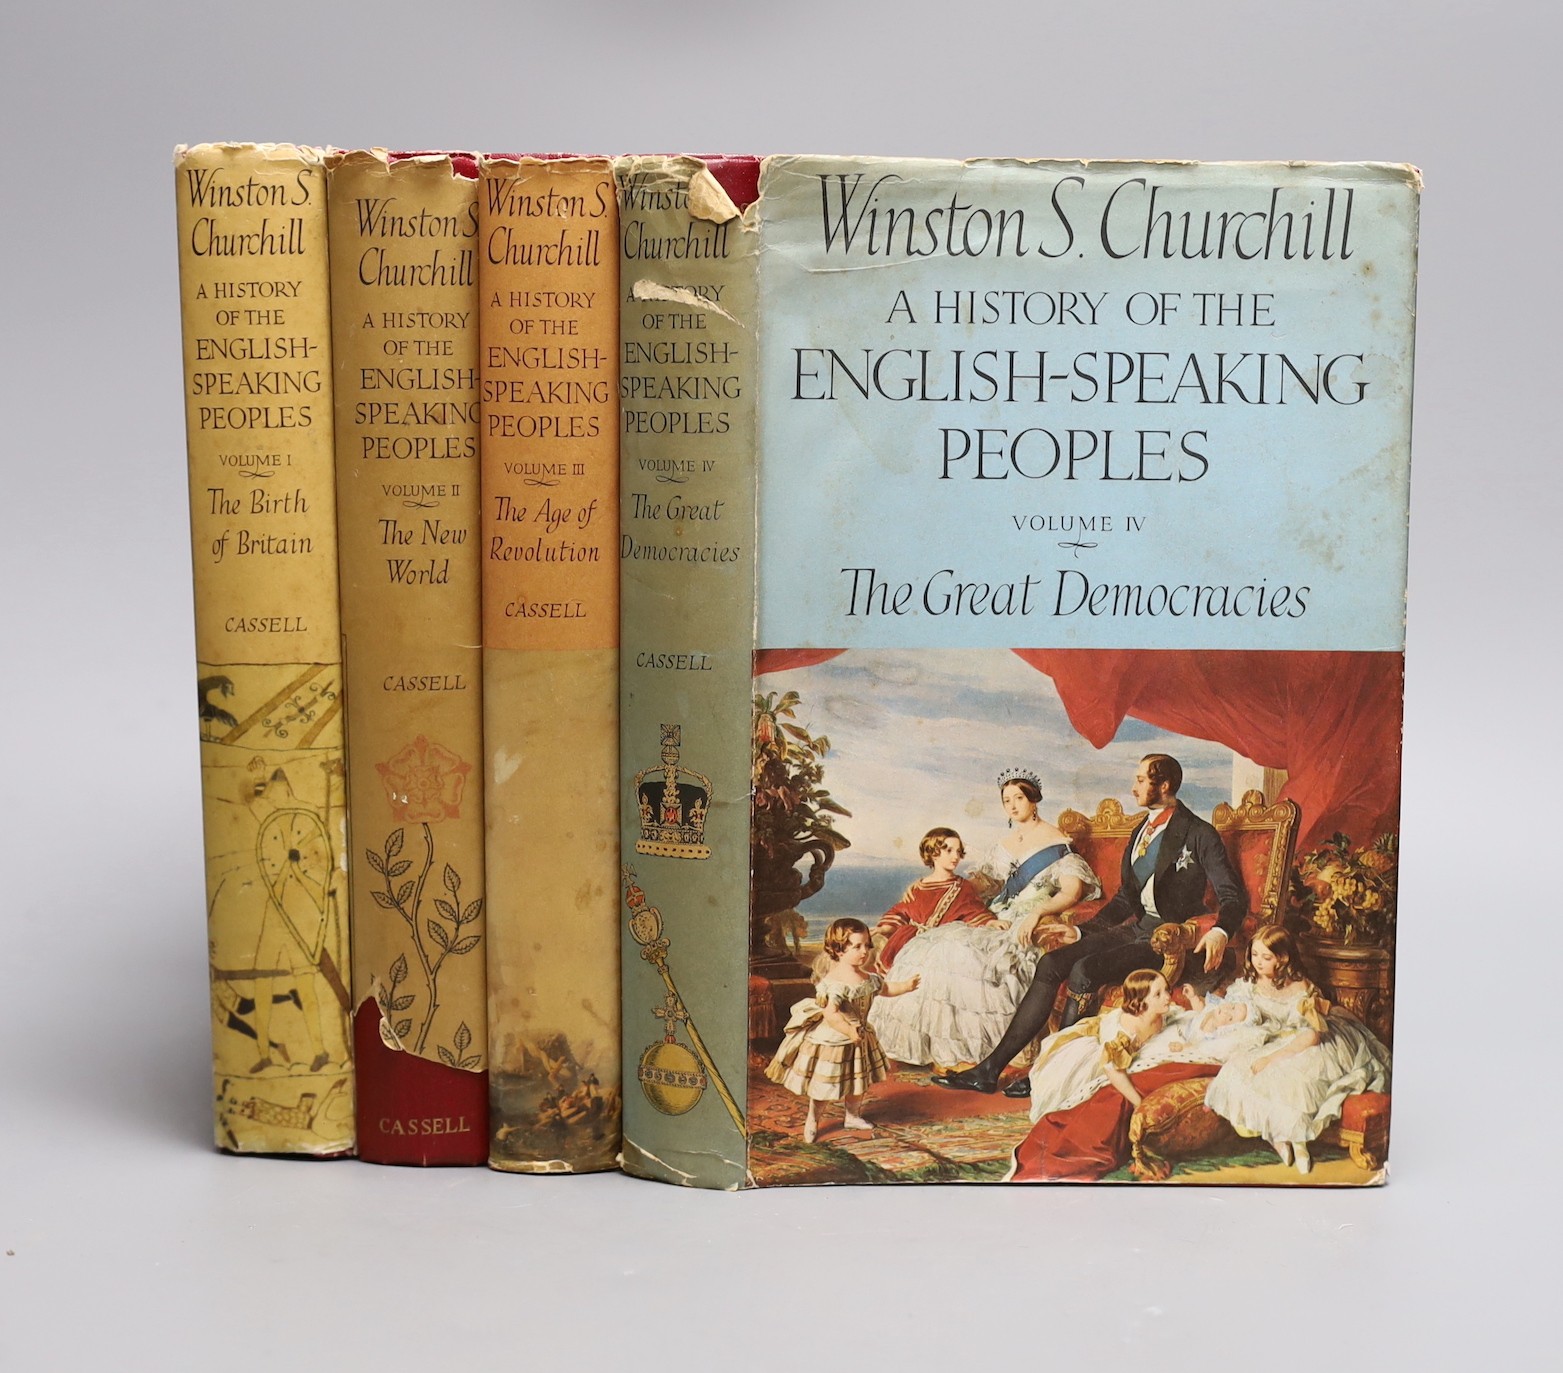 Churchill, Winston Spencer - A History of the English-Speaking Peoples, 1st edition, 4 vols, red cloth gilt, with price clipped d/j’s, Cassell and Company, London, 1956-58